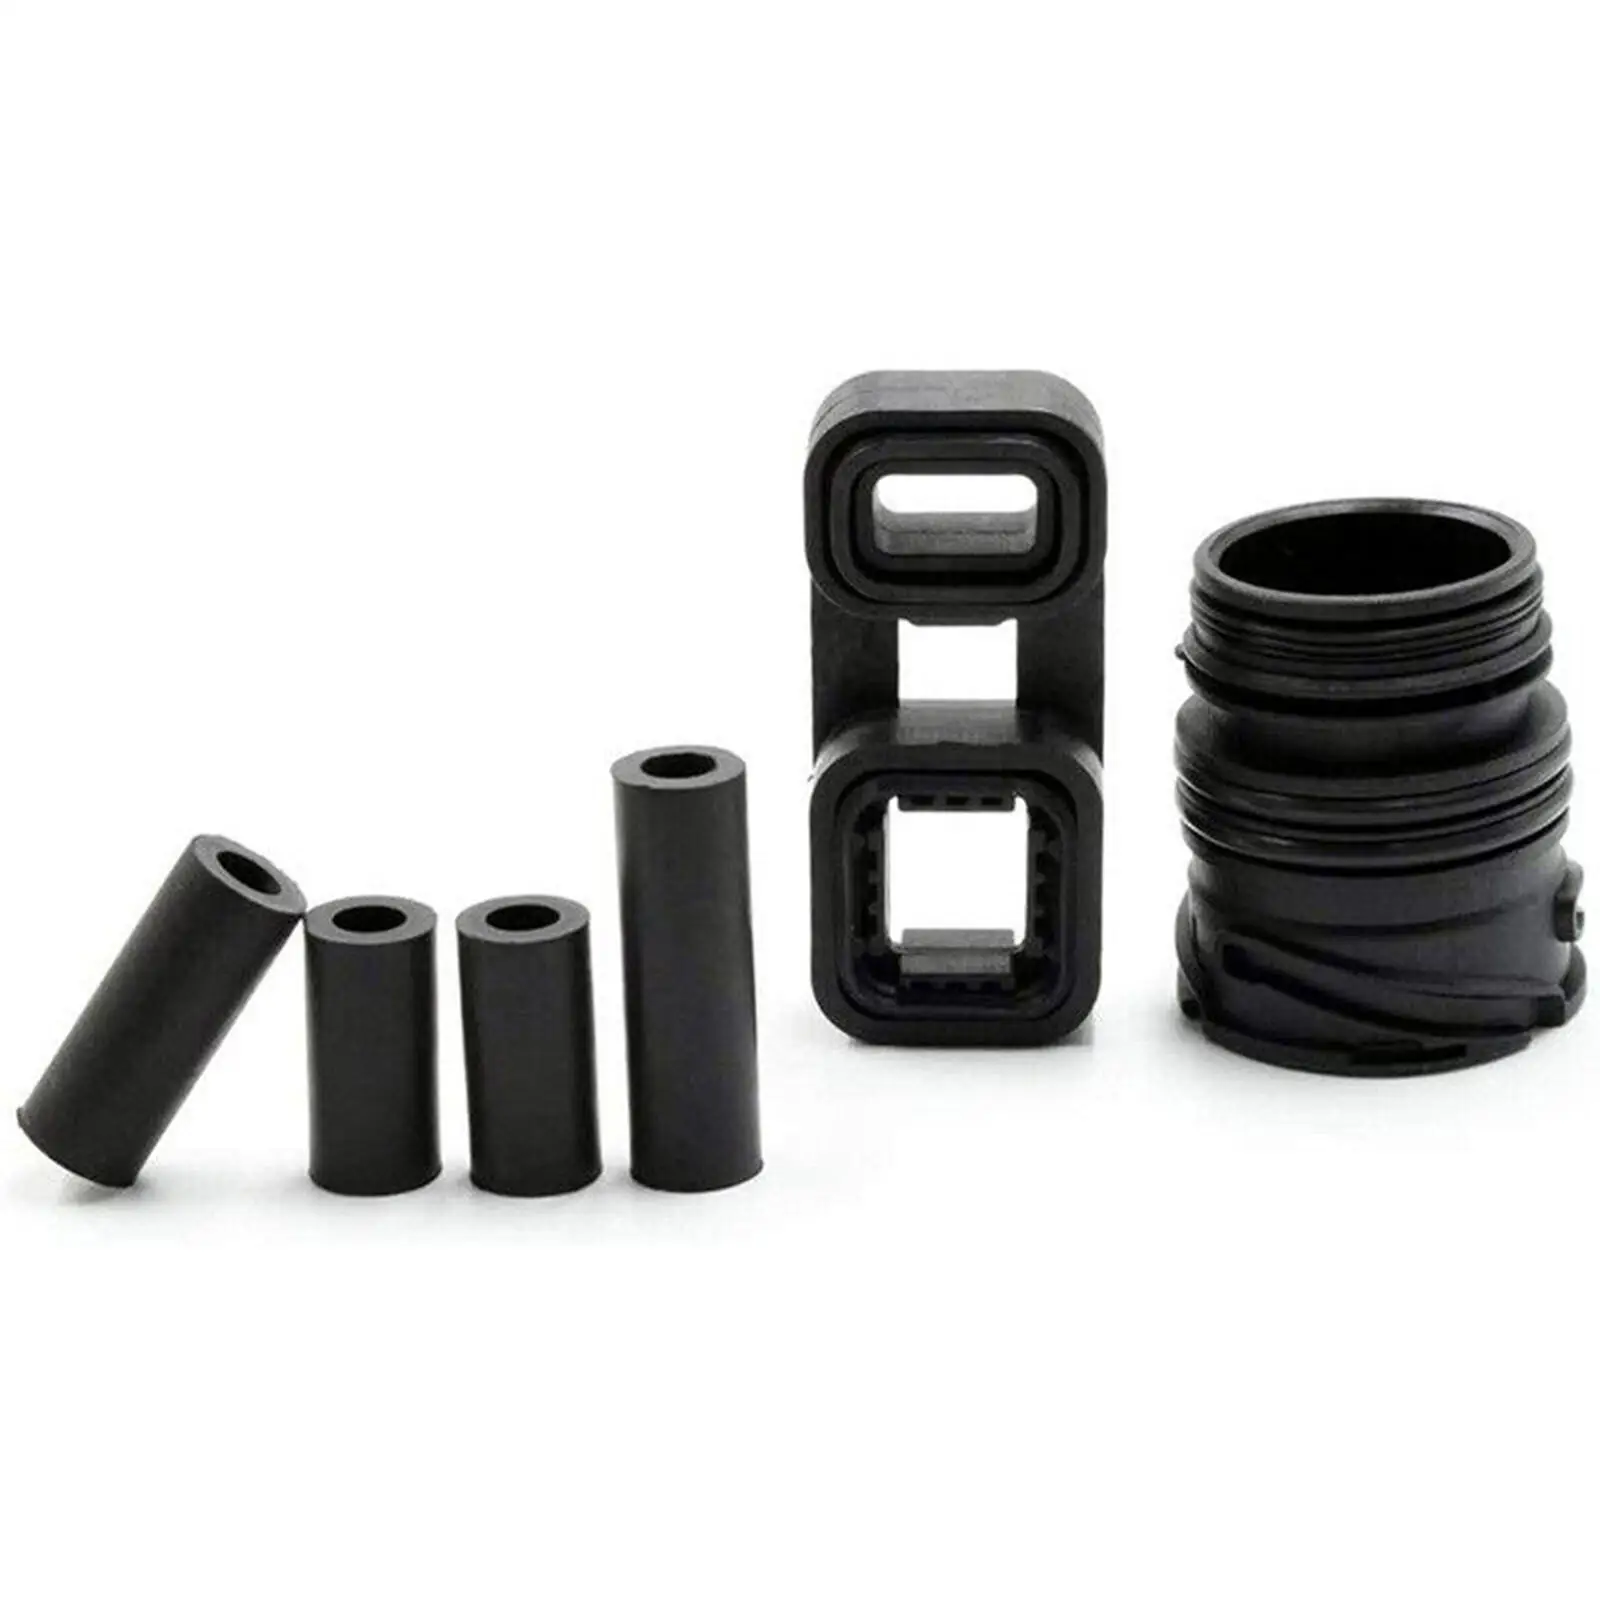 Sleeve and Adapter Seal Kit High Performance for BMW 1 Series x1, x3, x5, Z4, Zf Models with 6 Speed Zf 6HP26 3 Series